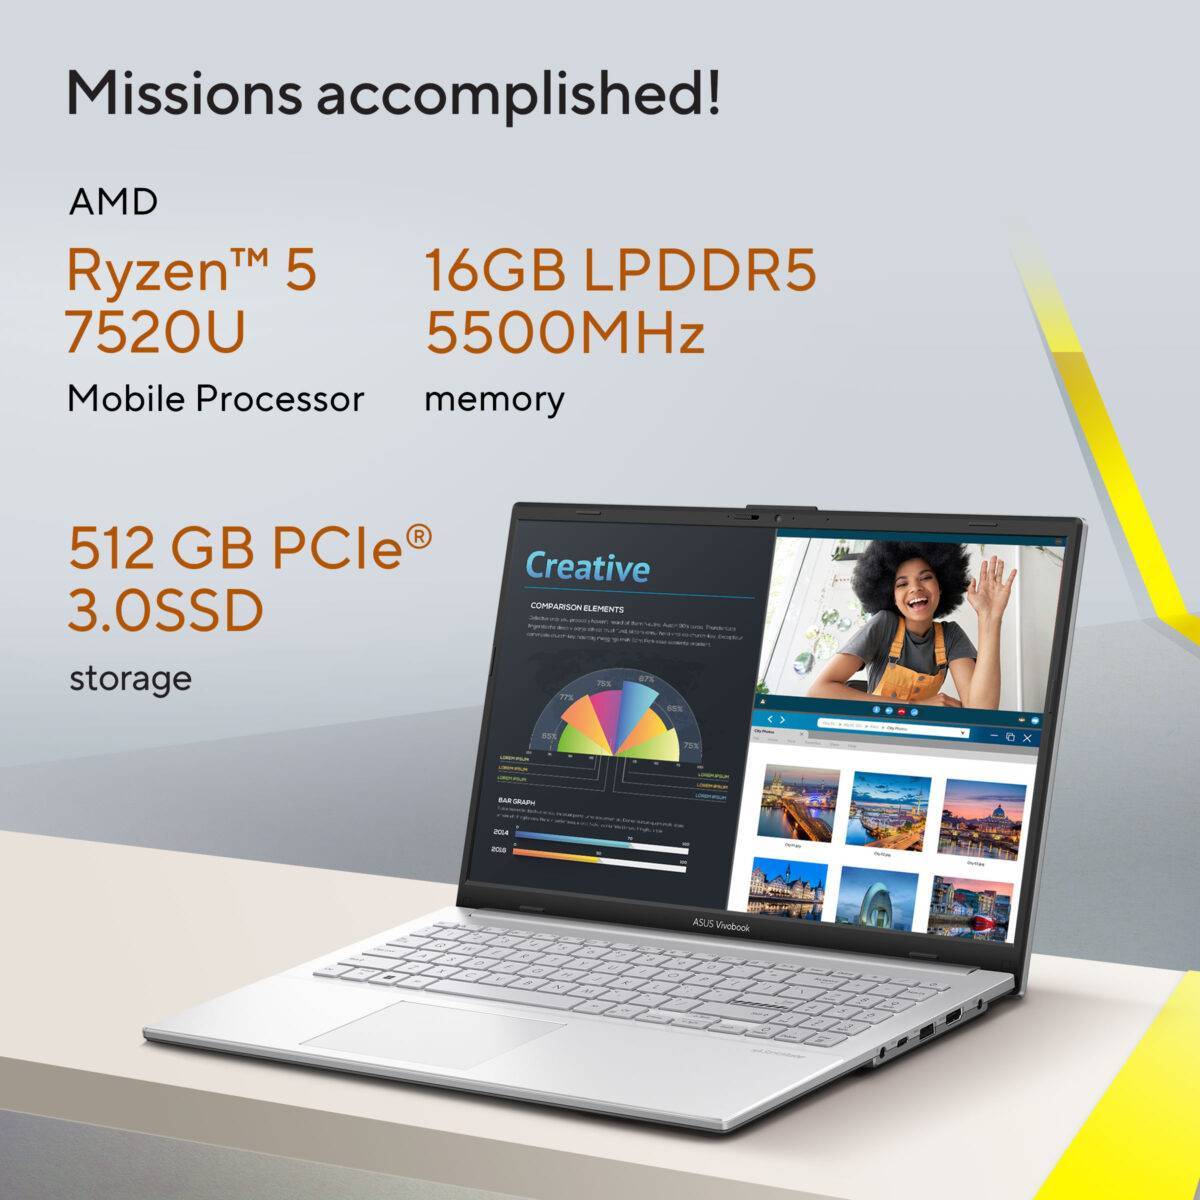 The Latest AMD Ryzen 7000 Mobile Processor, fast LPDDR5 memory, 512 GB of speedy SSD storage to make sure there is always plenty power on tap.